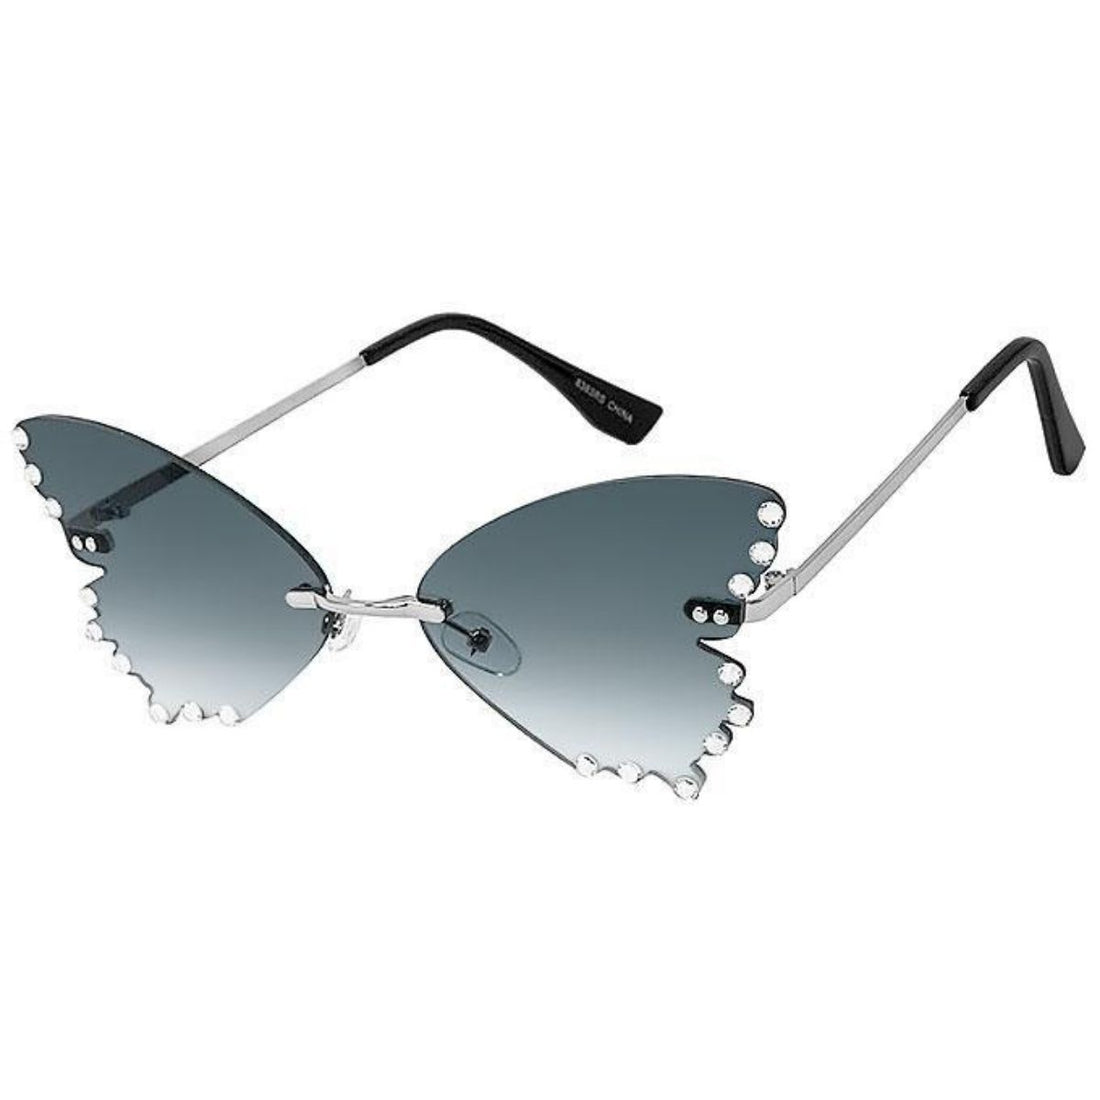 Black Butterfly Shaped Lens Sunglasses